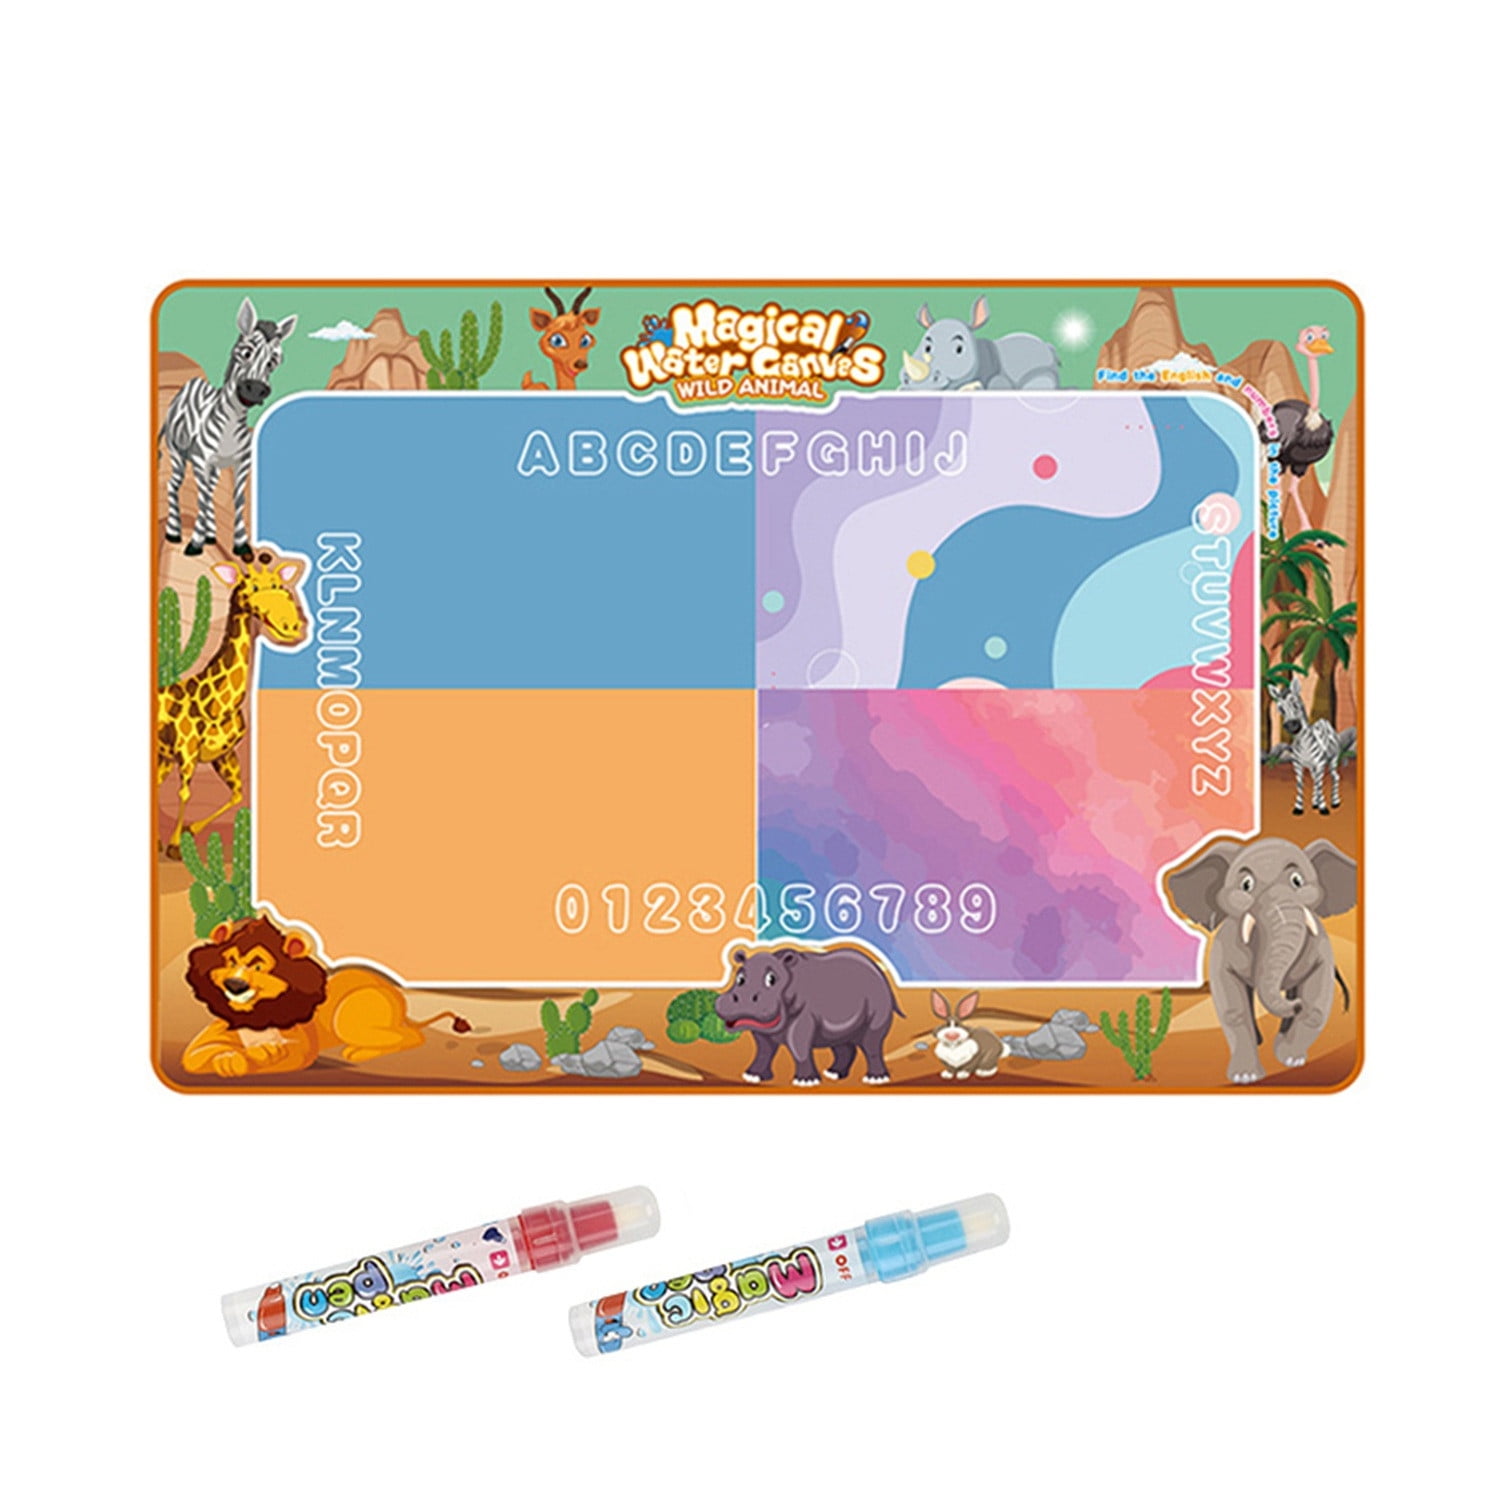 Allaugh 34.5 x 22.5 in Water Drawing Mat Water Doodle Mat for Toddlers 1-3  Years Old Coloring Painting Aqua Doodle Mats Educational Toys Boys Xmas